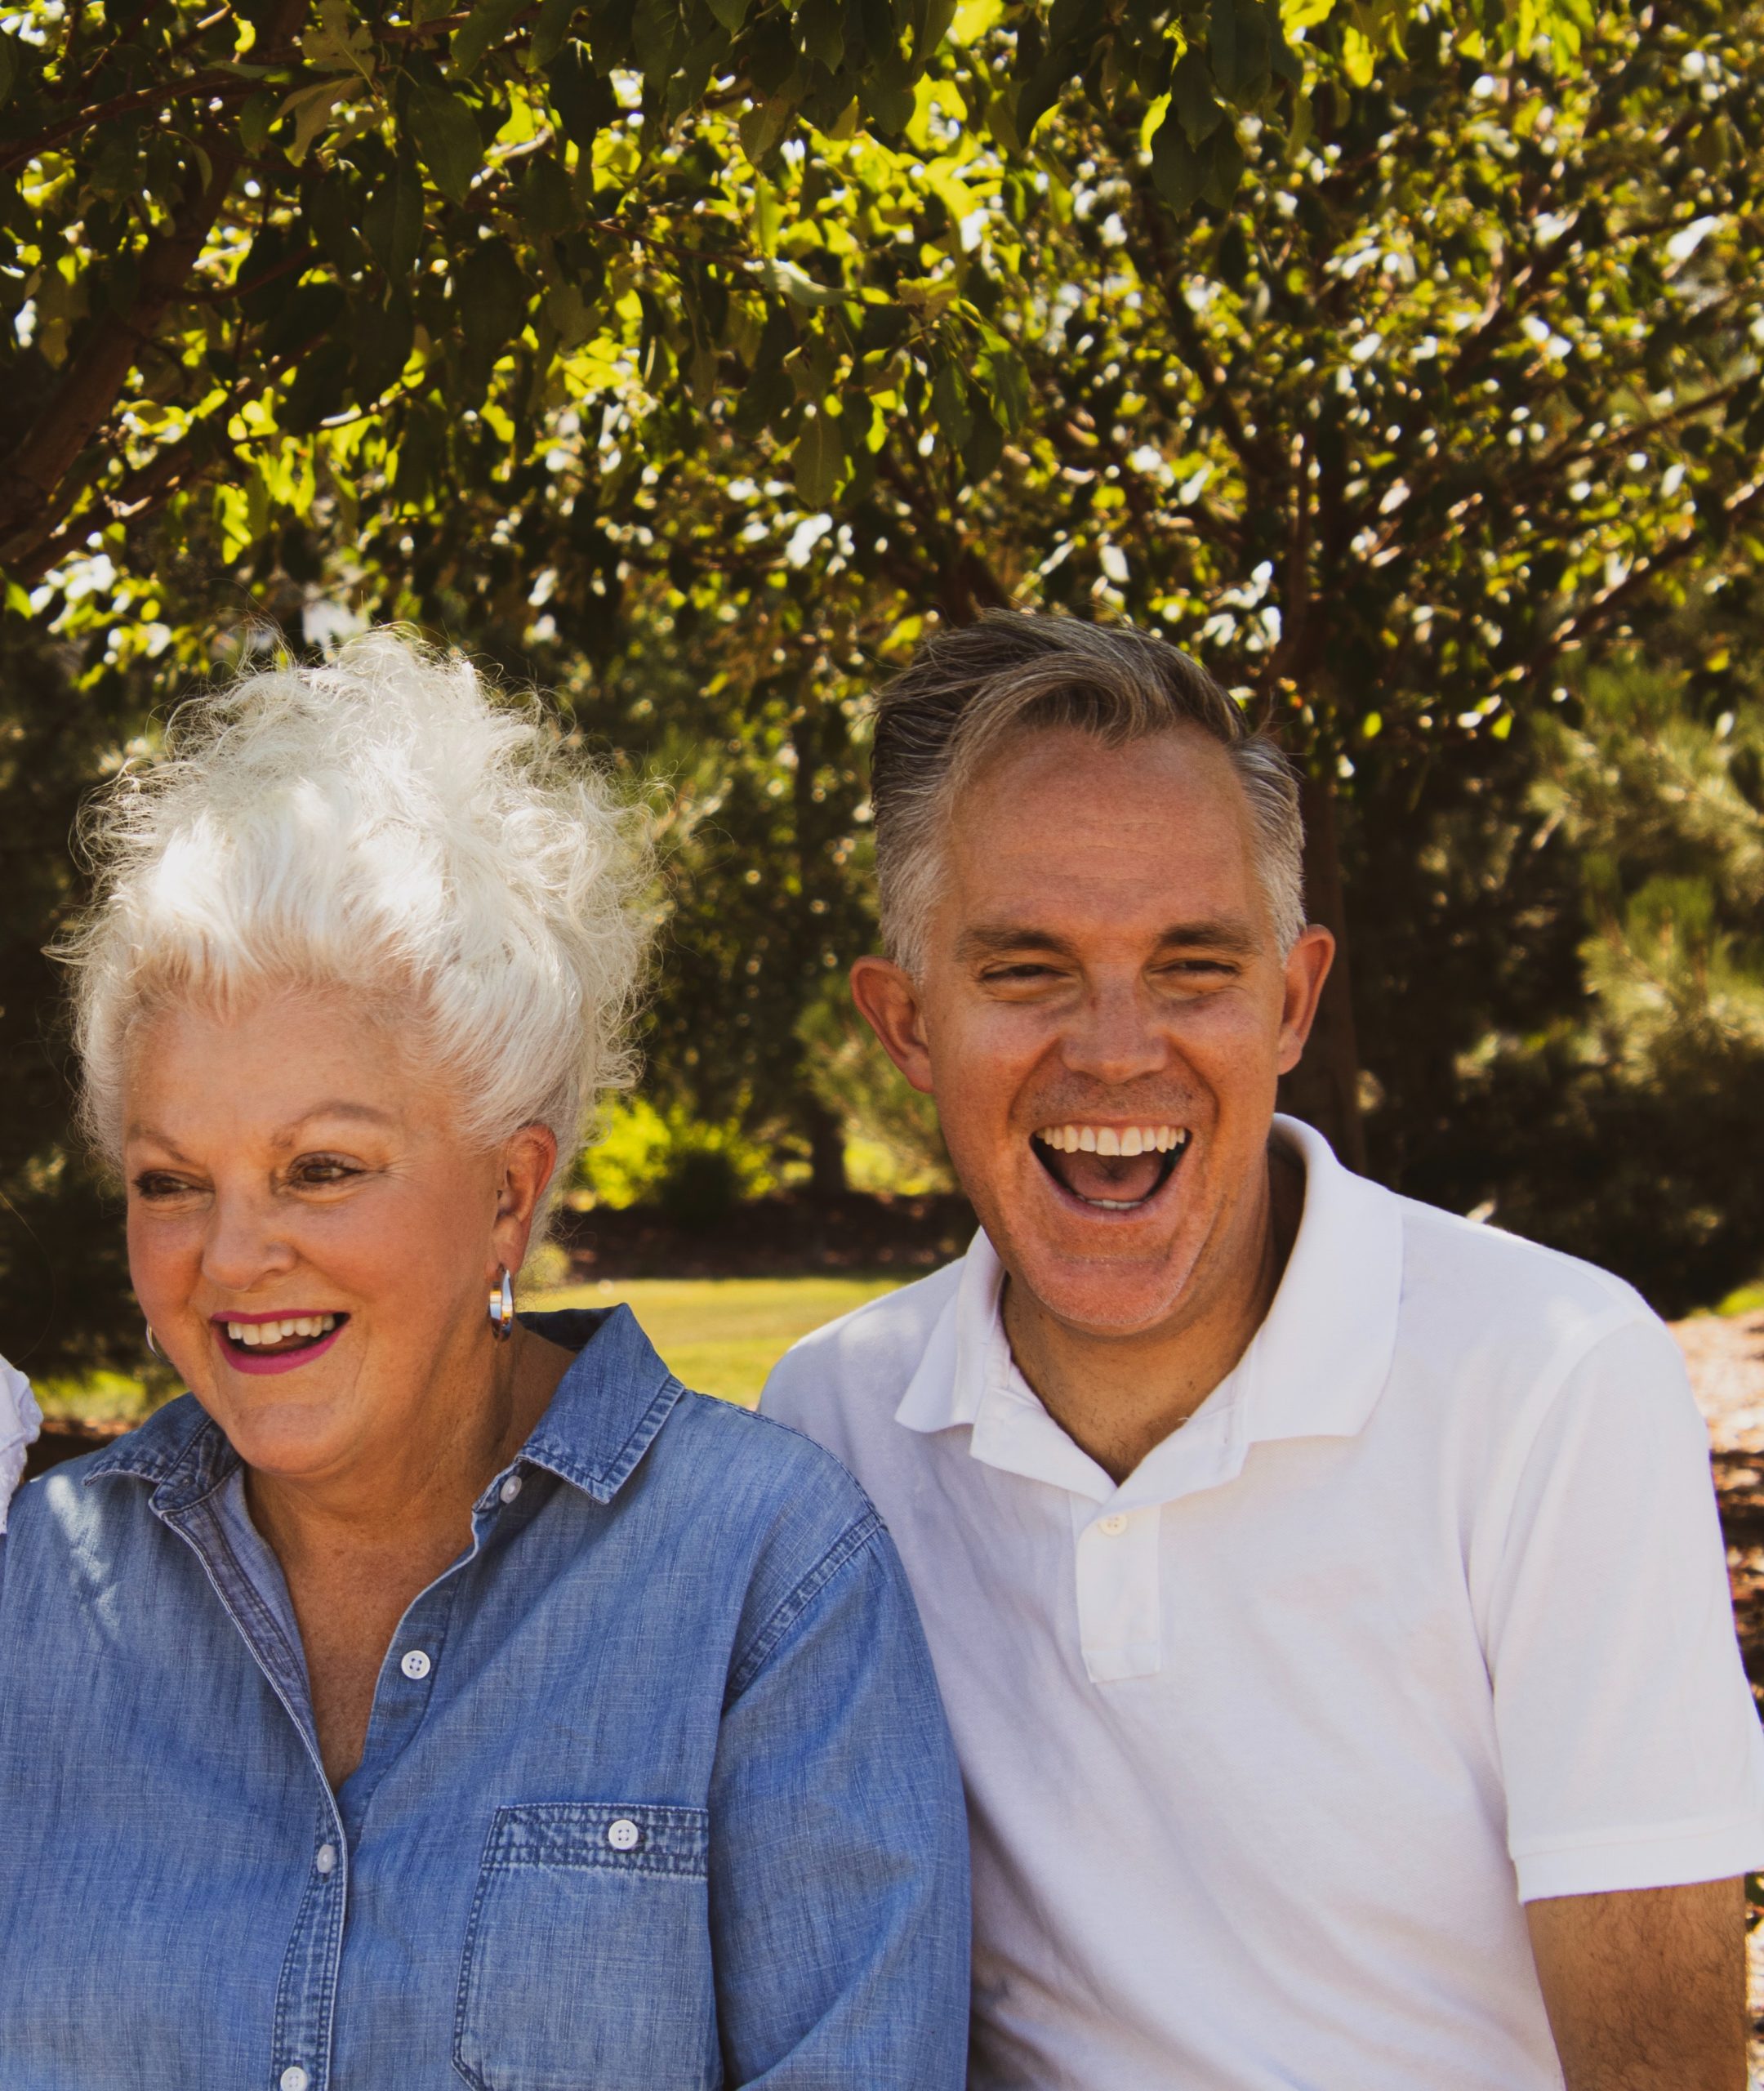 Retired couple sitting side by side smiling; pertaining to option for getting equity from your home.